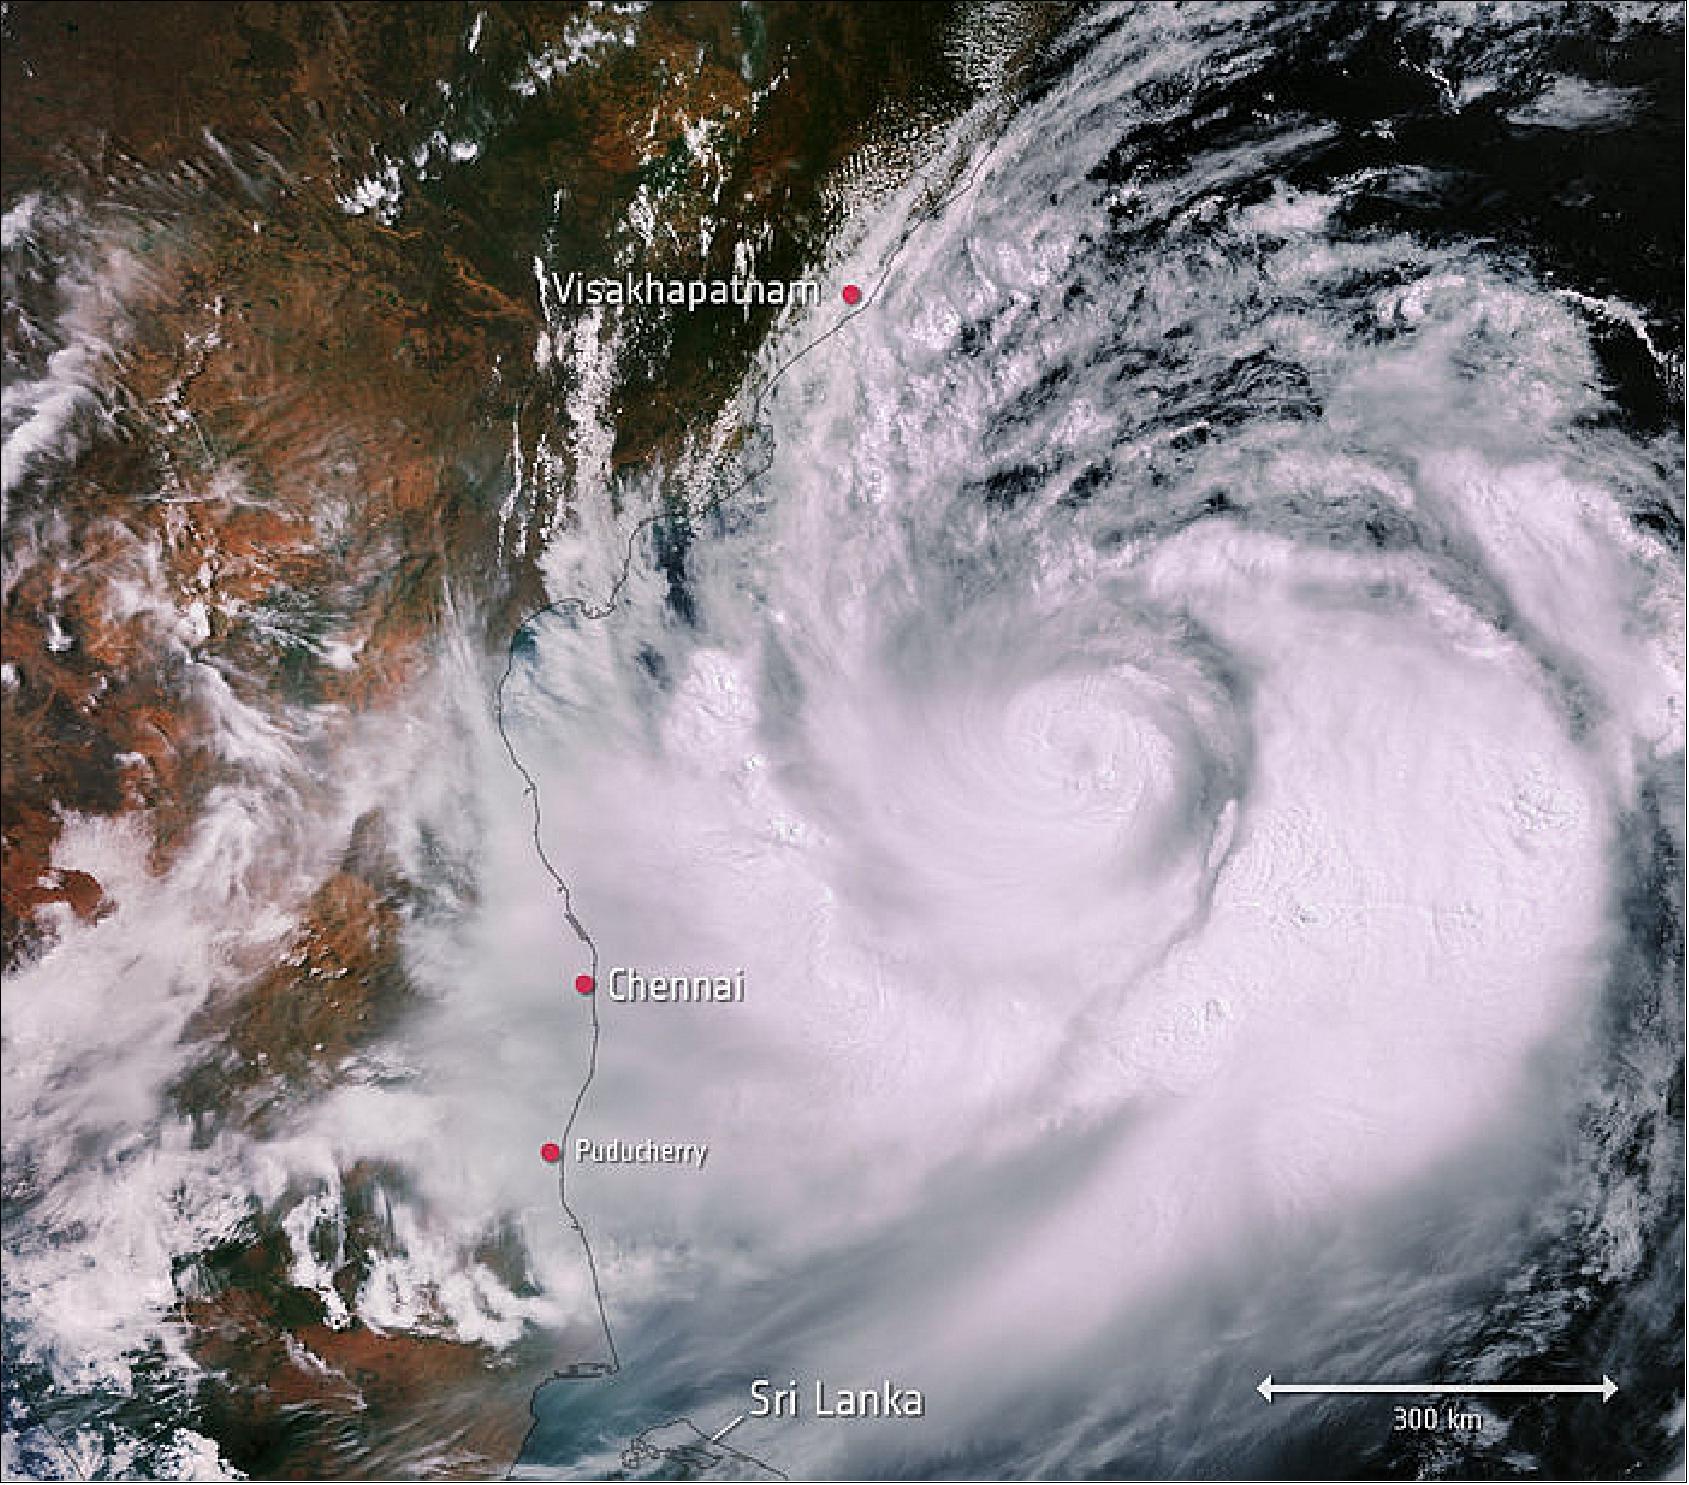 Figure 18: With wind speeds of up to 200 km per hour, heavy rainfall and flooding have been forecast along the Odisha coast, and has led to the evacuation of around 800 000 people from the nearby low-lying areas. In the image, the width of the storm is estimated to be around 700-800 km. Once Cyclone Fani makes landfall, it is expected to move north-east, hitting Bangladesh and Bhutan on Saturday 4 May (image credit: ESA, the image contains modified Copernicus Sentinel data (2019), processed by ESA, CC BY-SA 3.0 IGO)